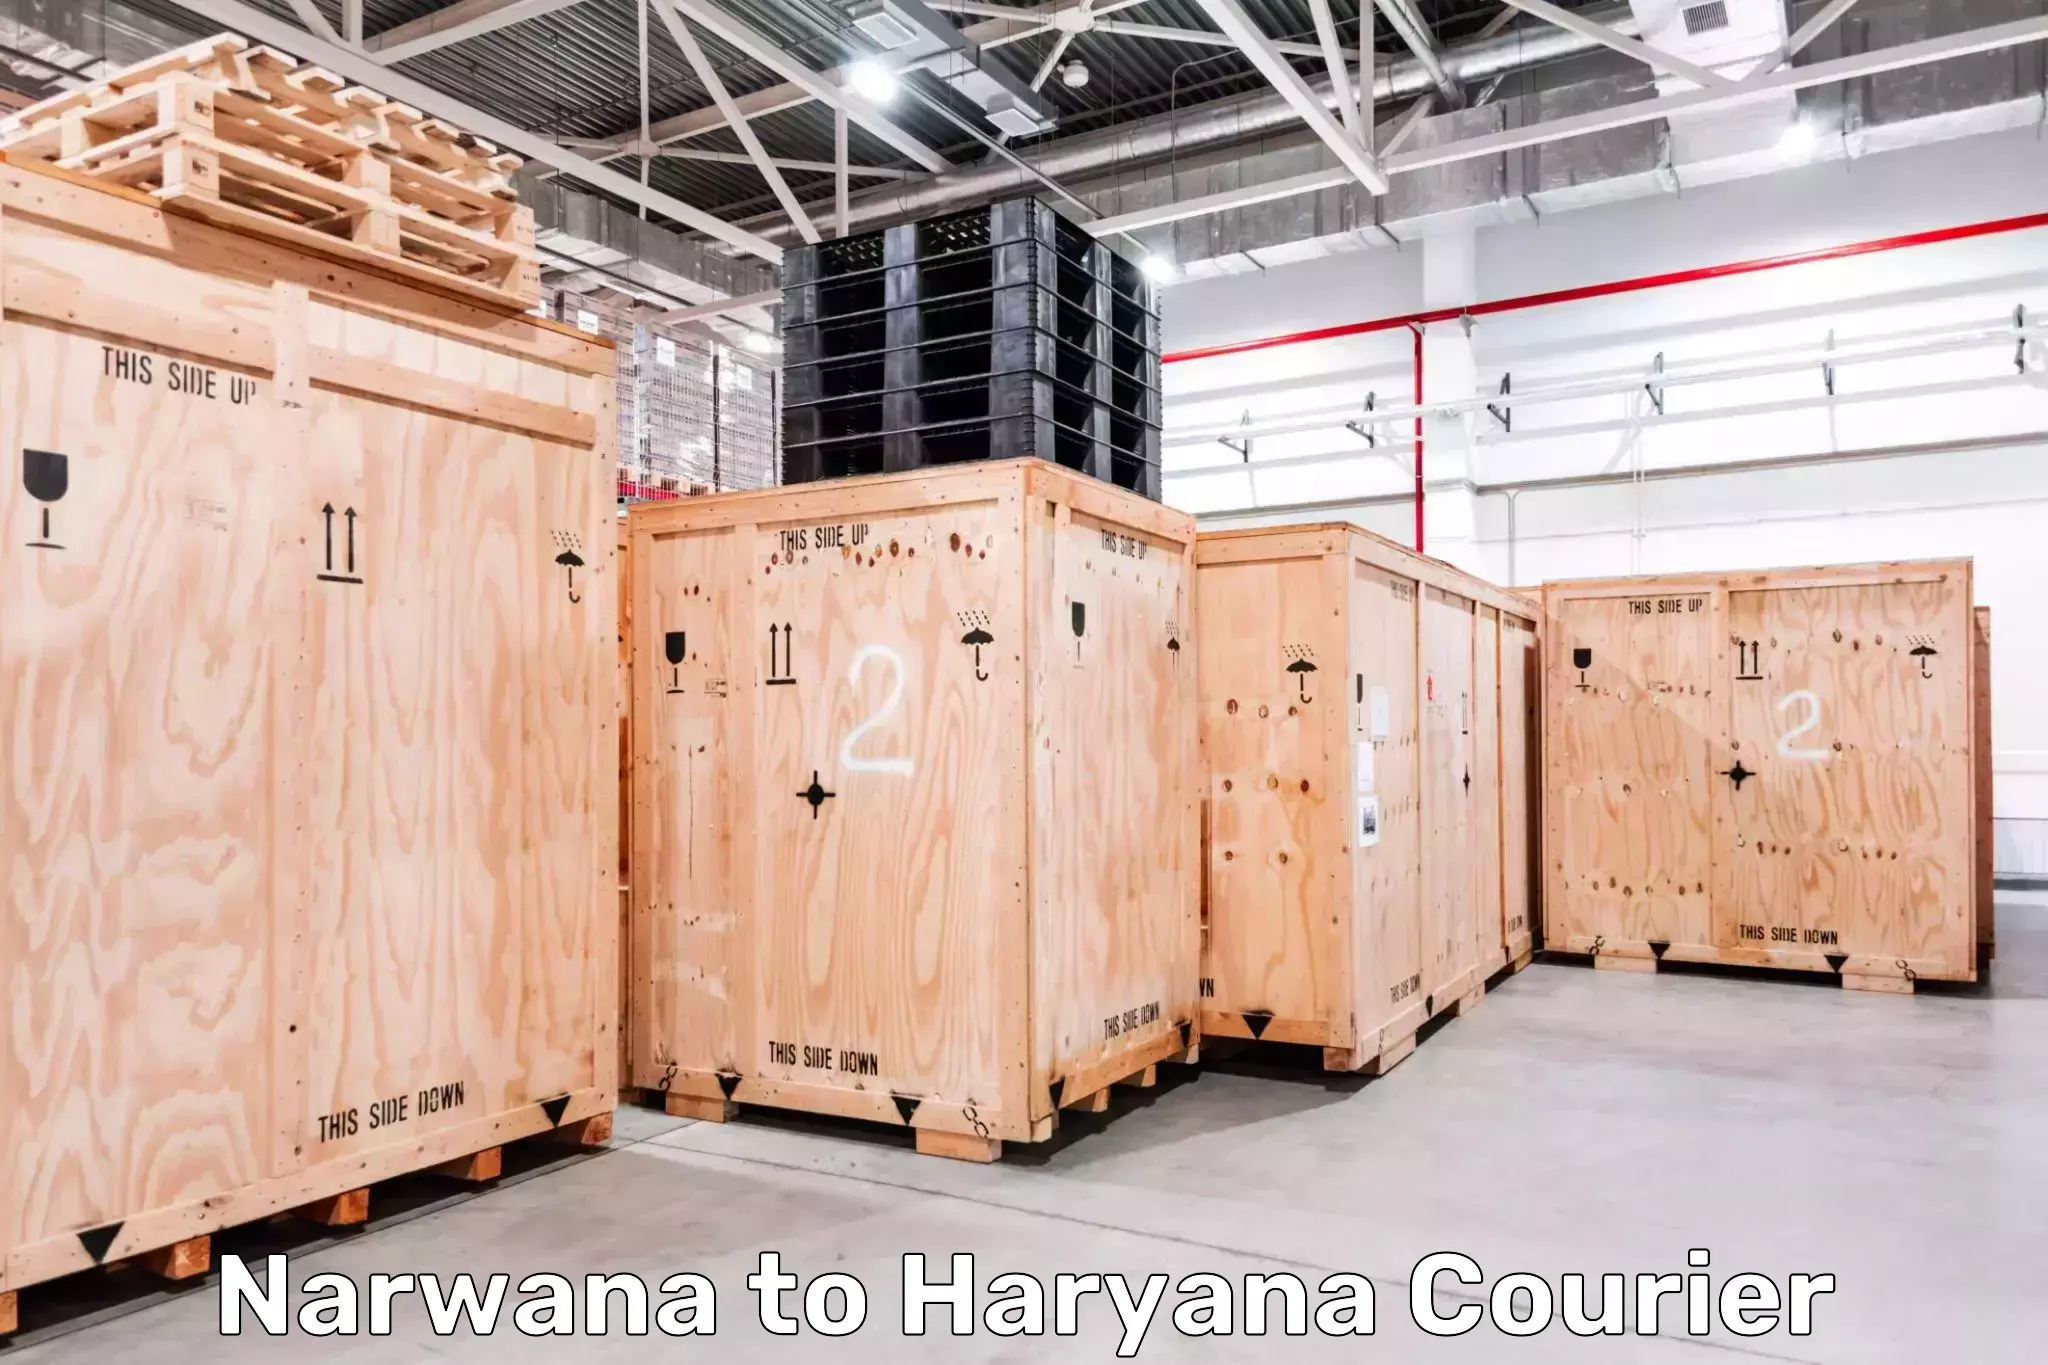 Express delivery capabilities in Narwana to Sirsa